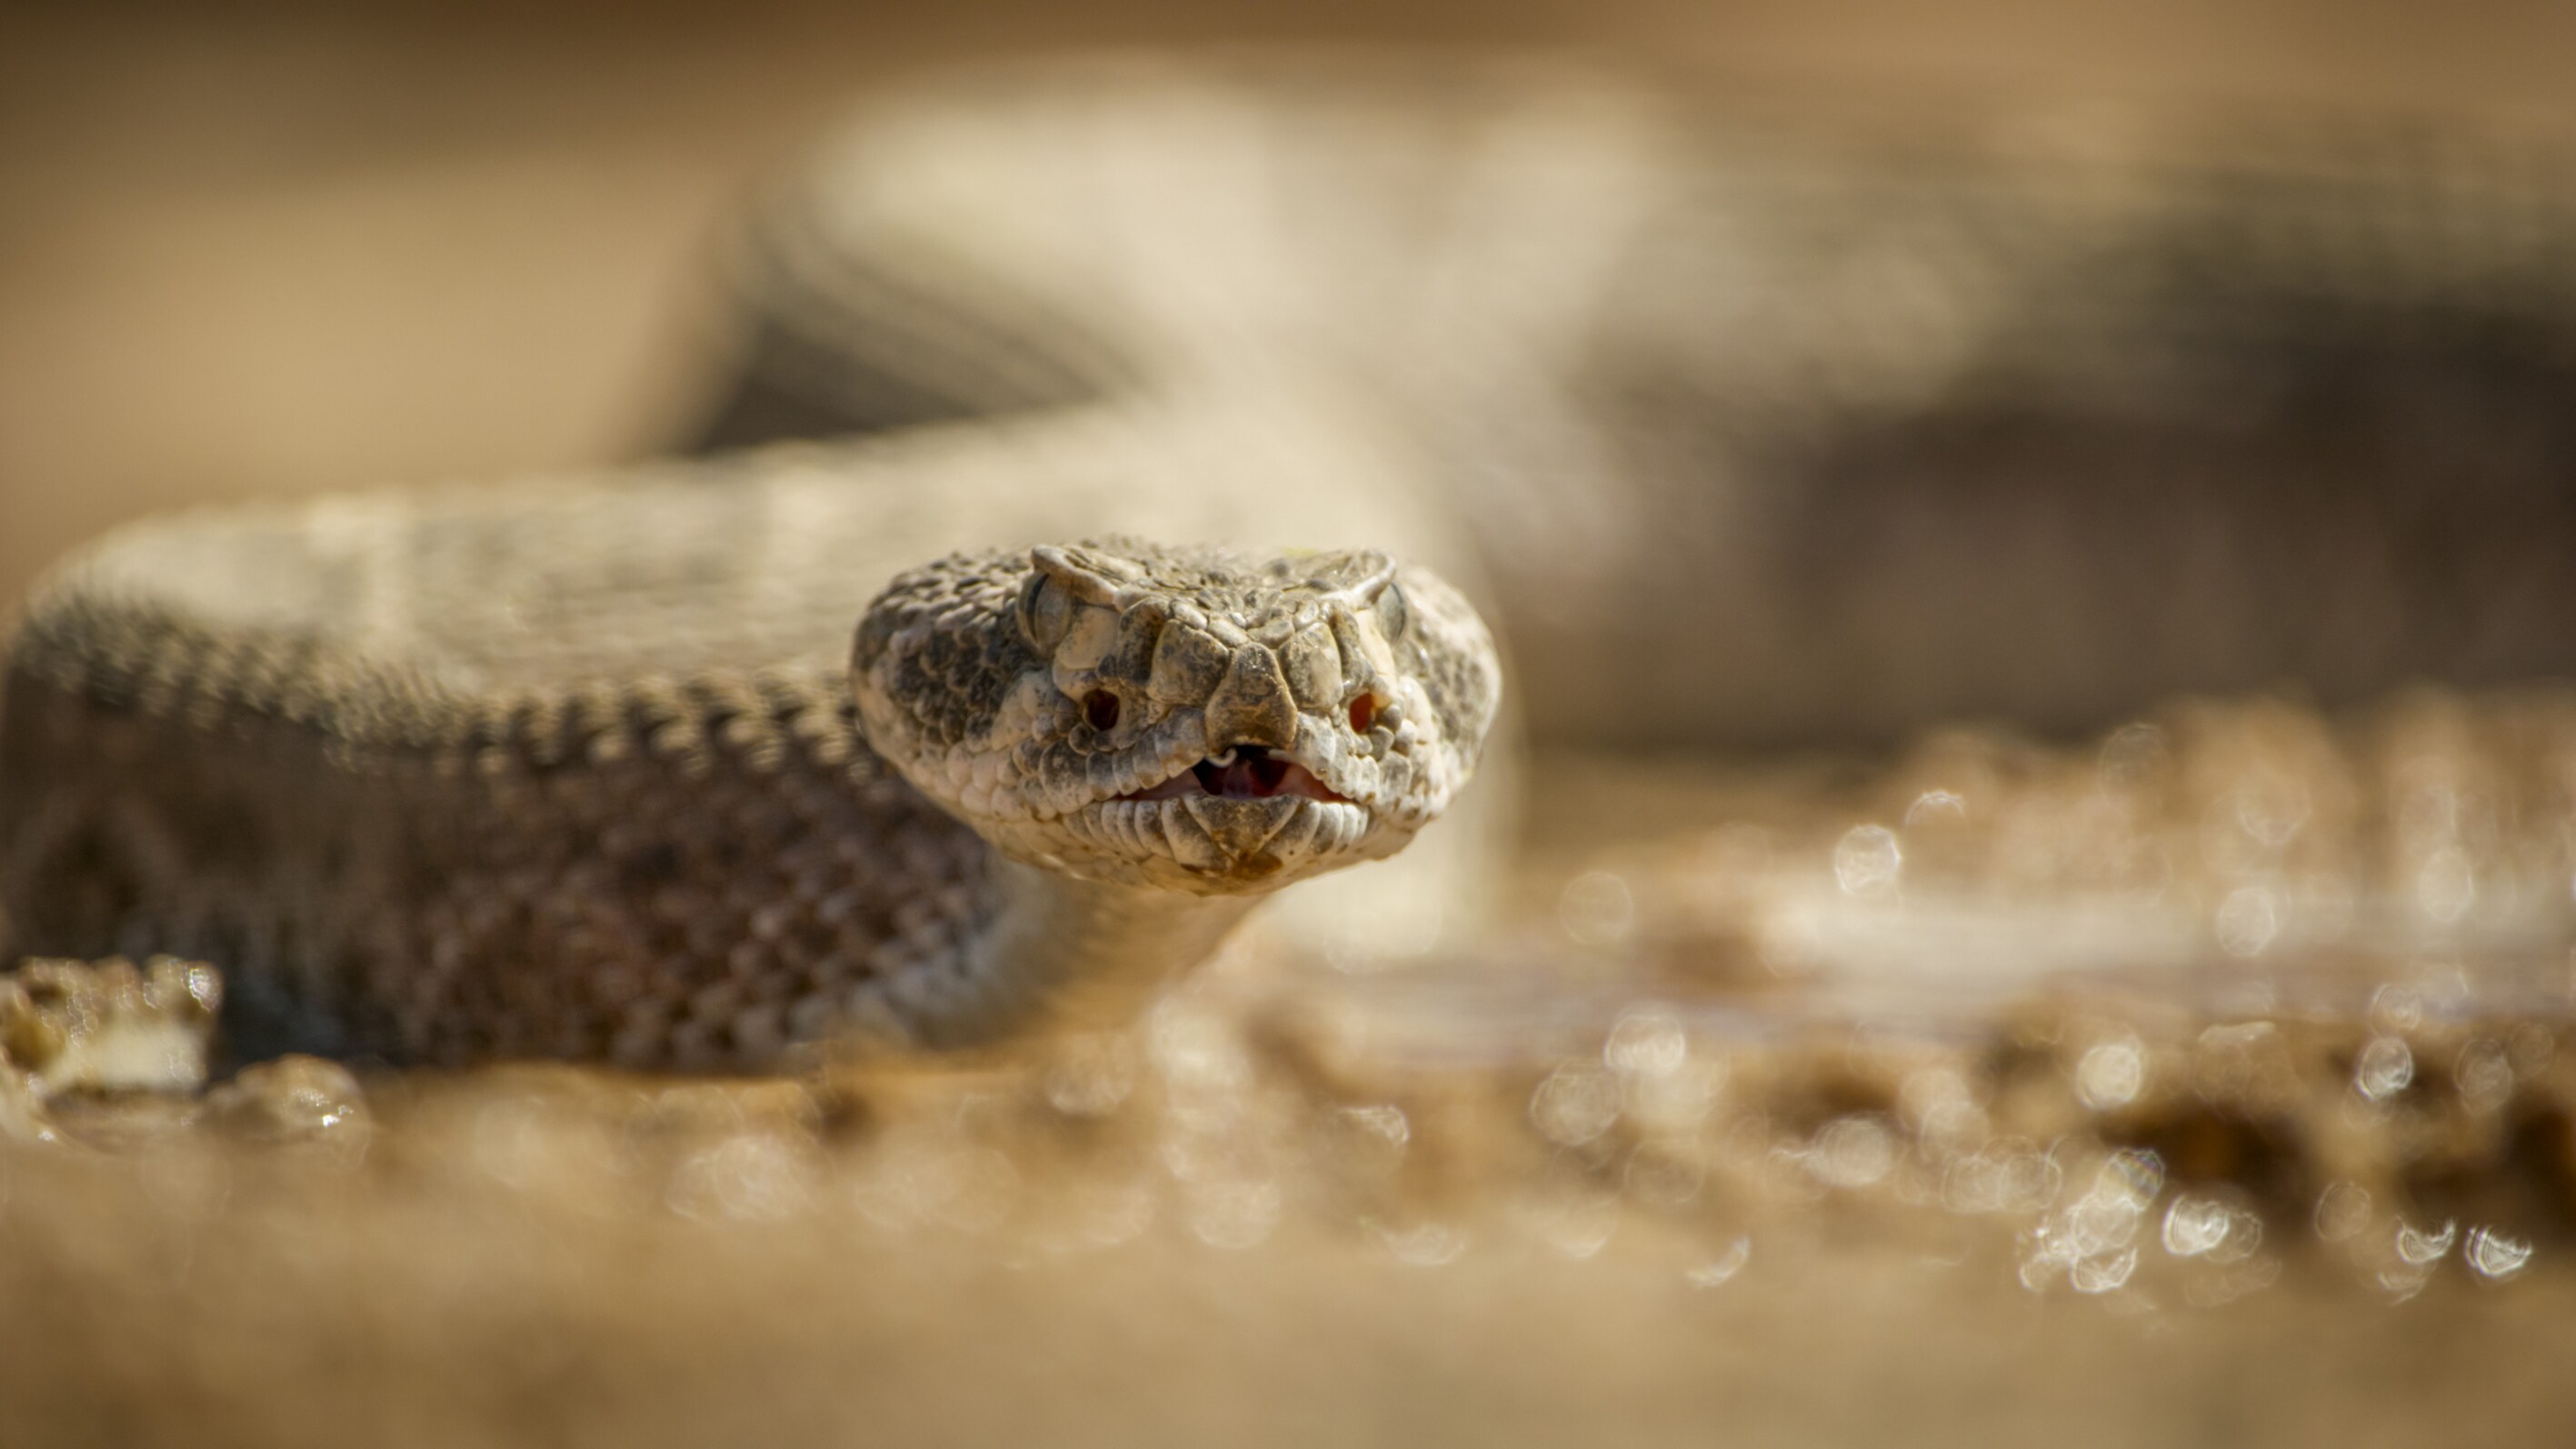 A Western diamondback rattlesnake travels through the scorching desert in search of prey. (National Geographic for Disney+)